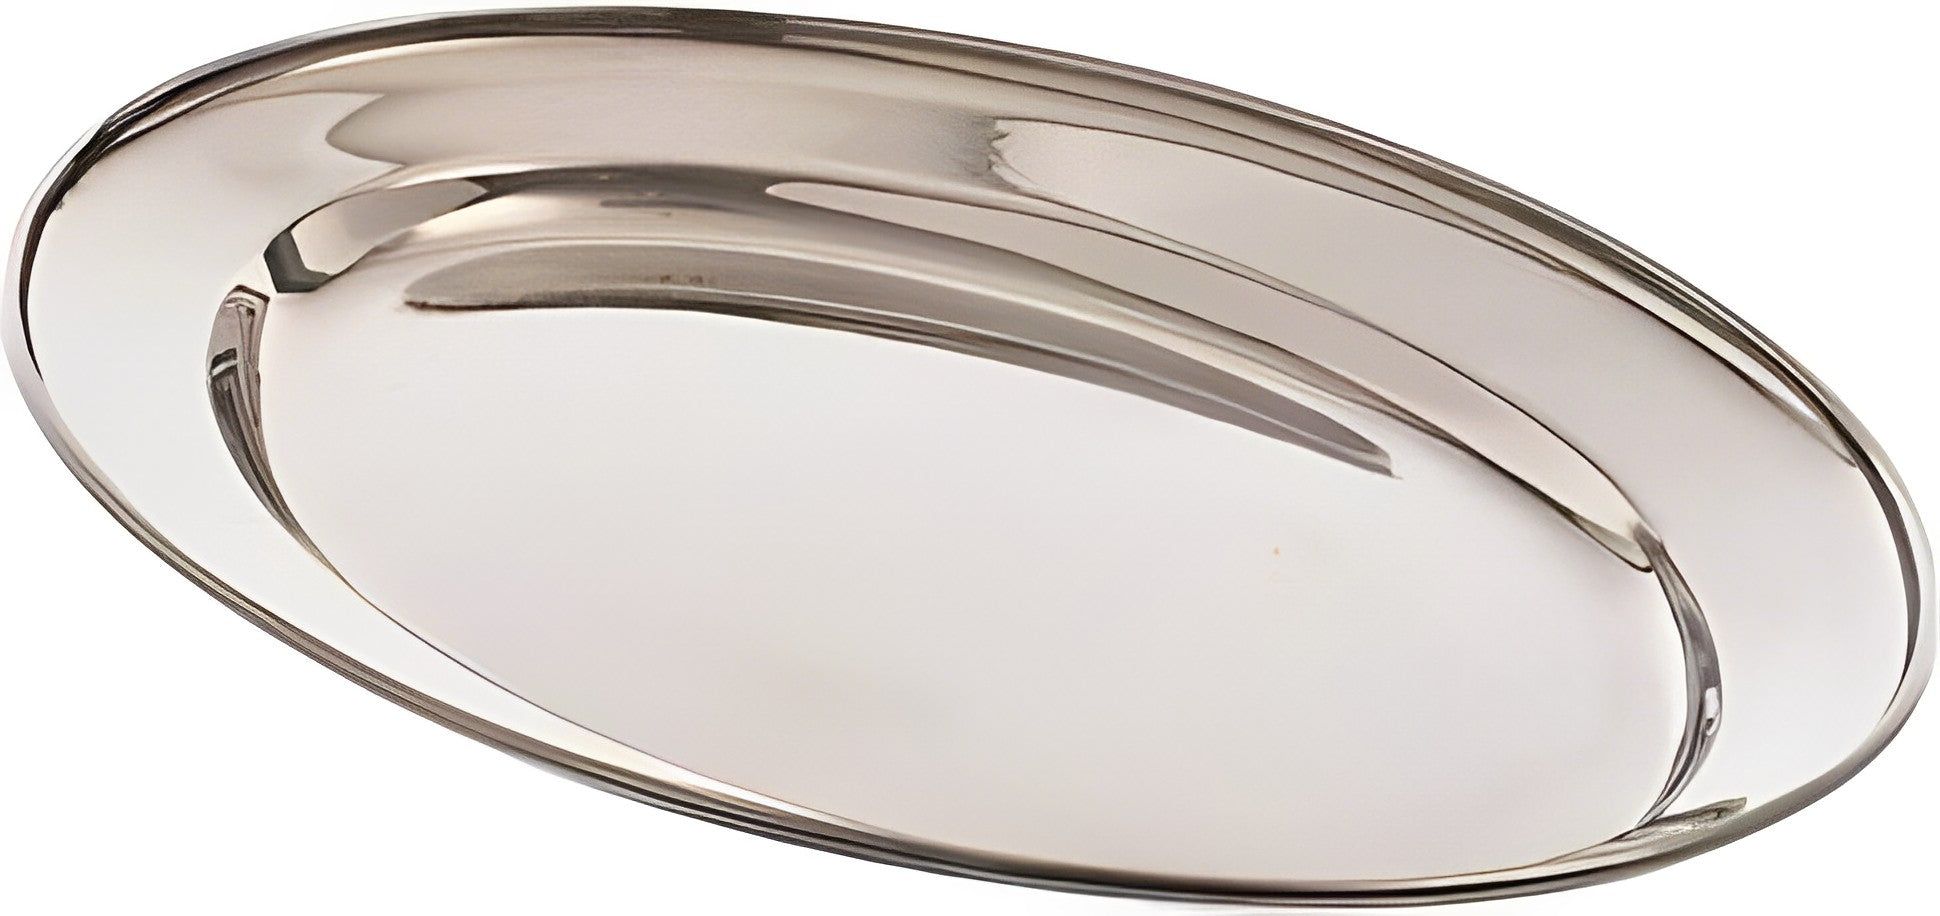 Browne - 20" Stainless Steel Oval Platter - 574185